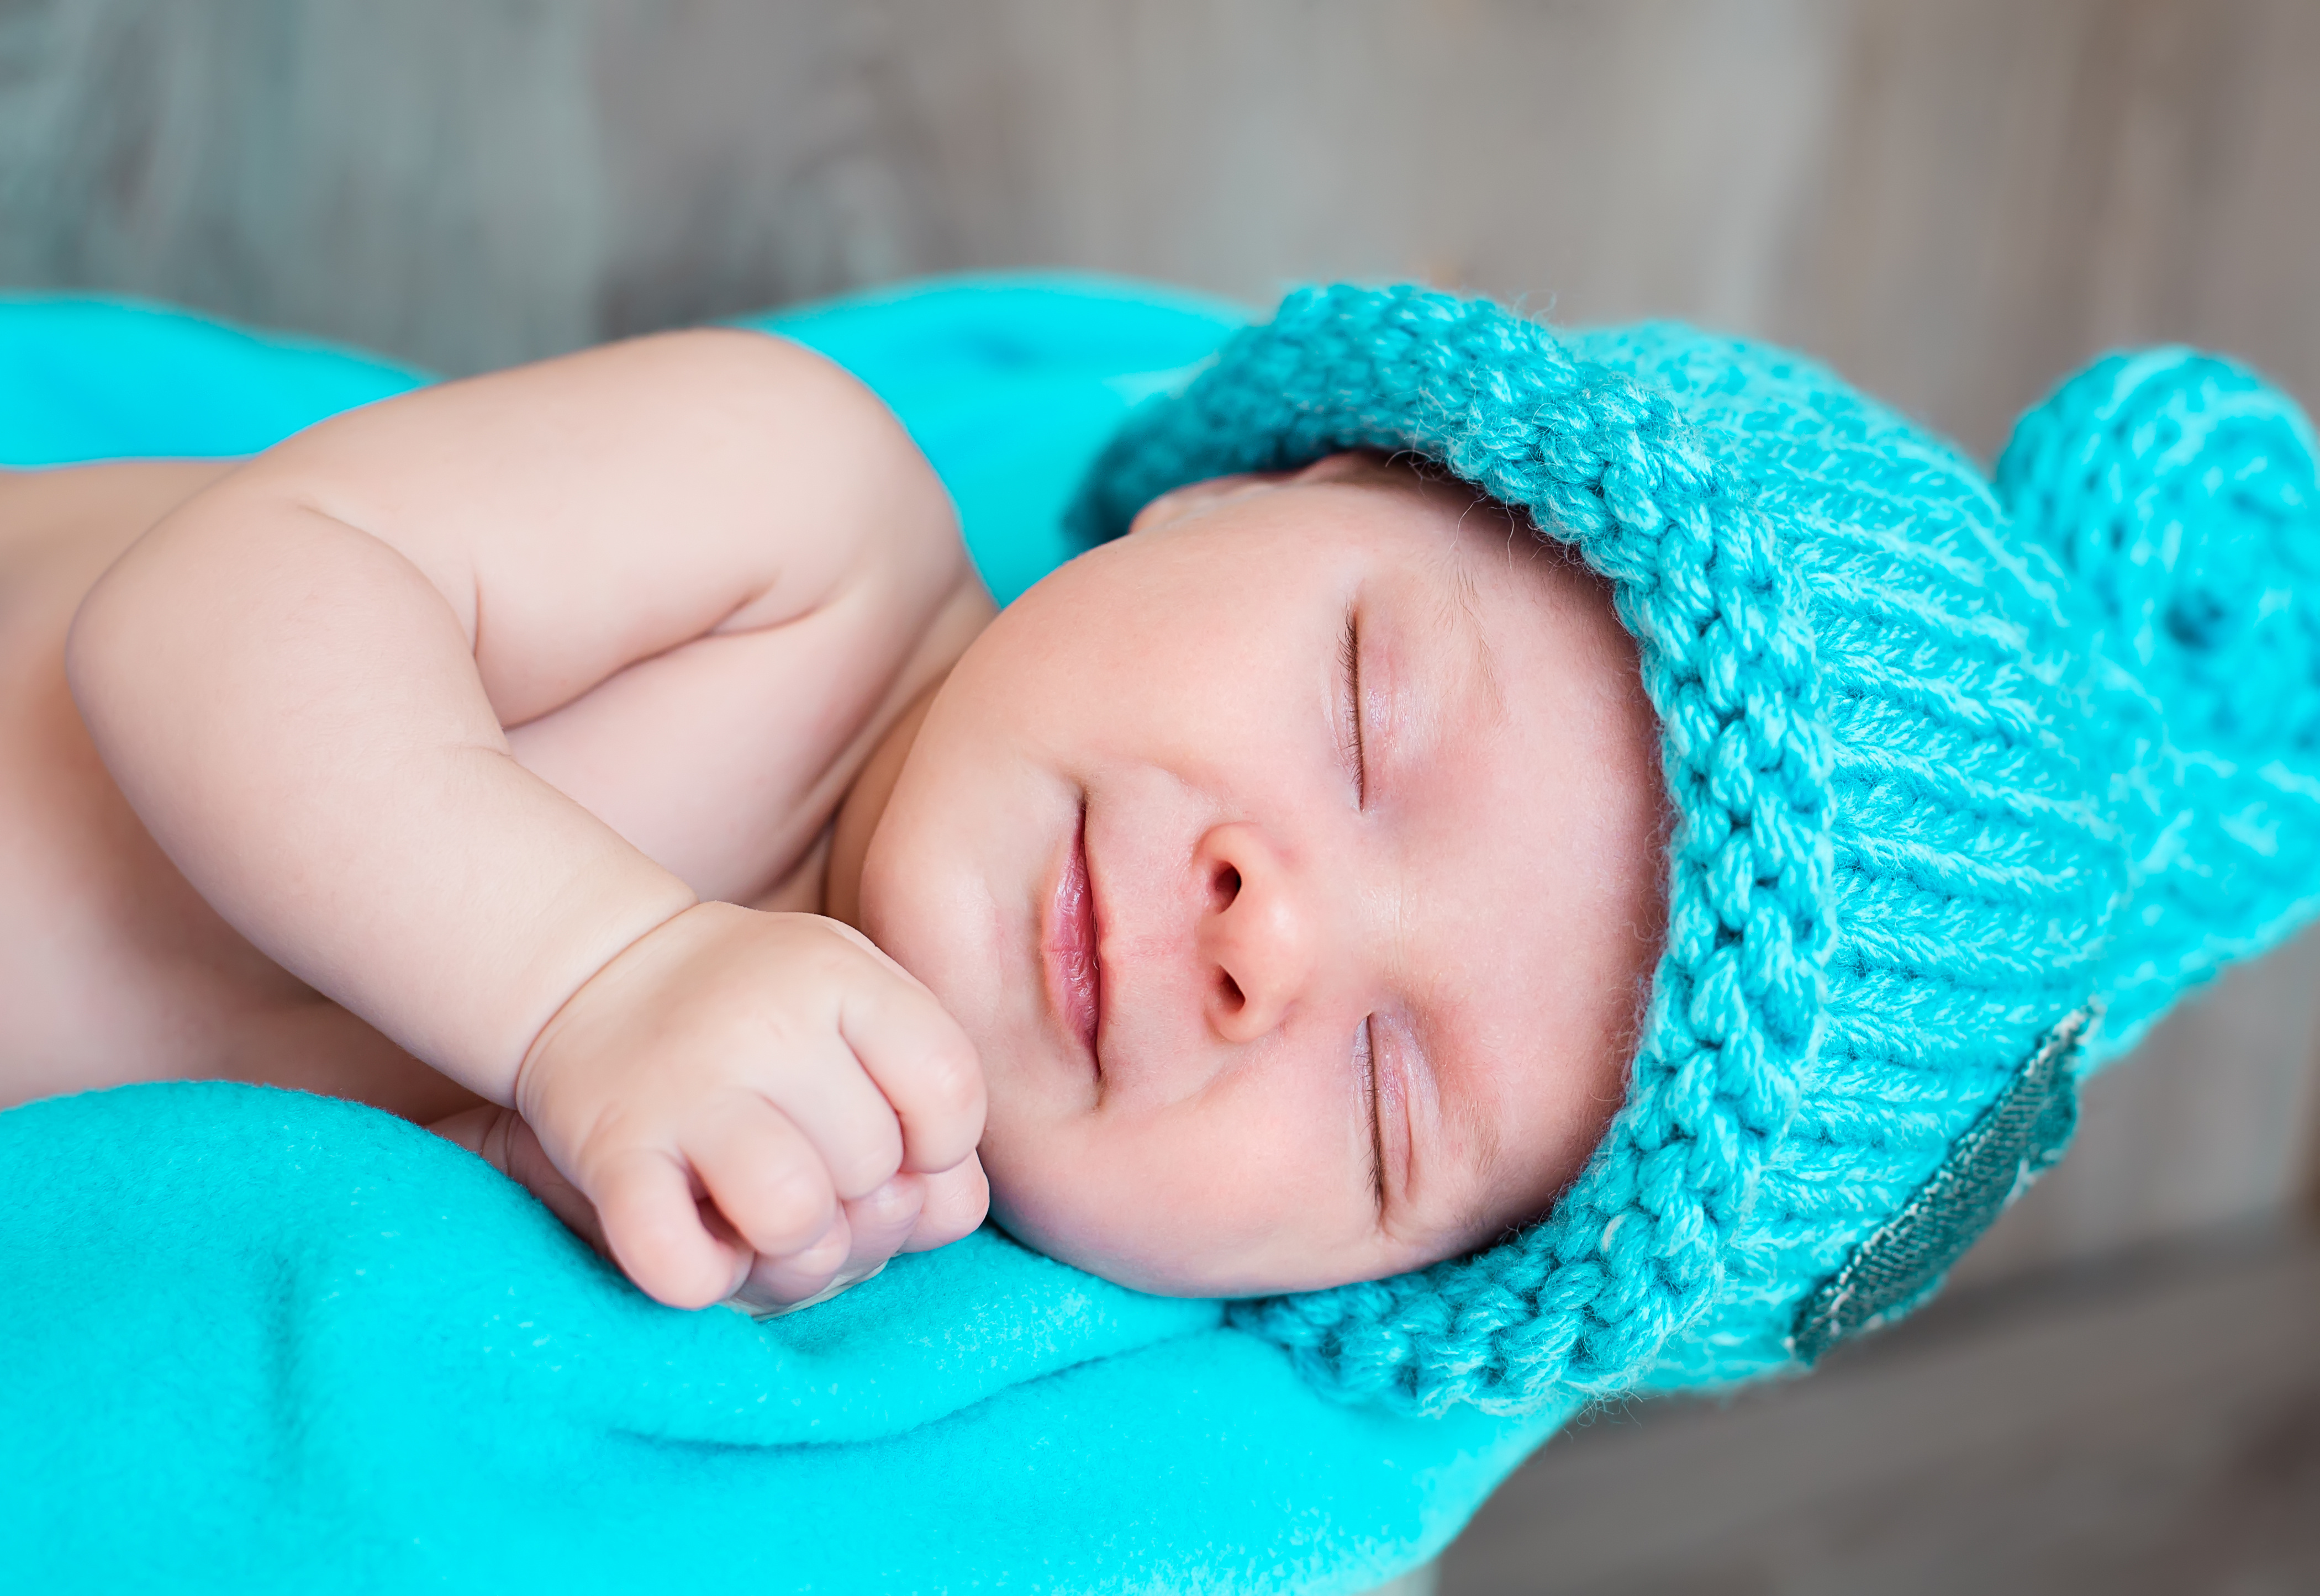 new boy wallpaper,child,baby,photograph,turquoise,skin